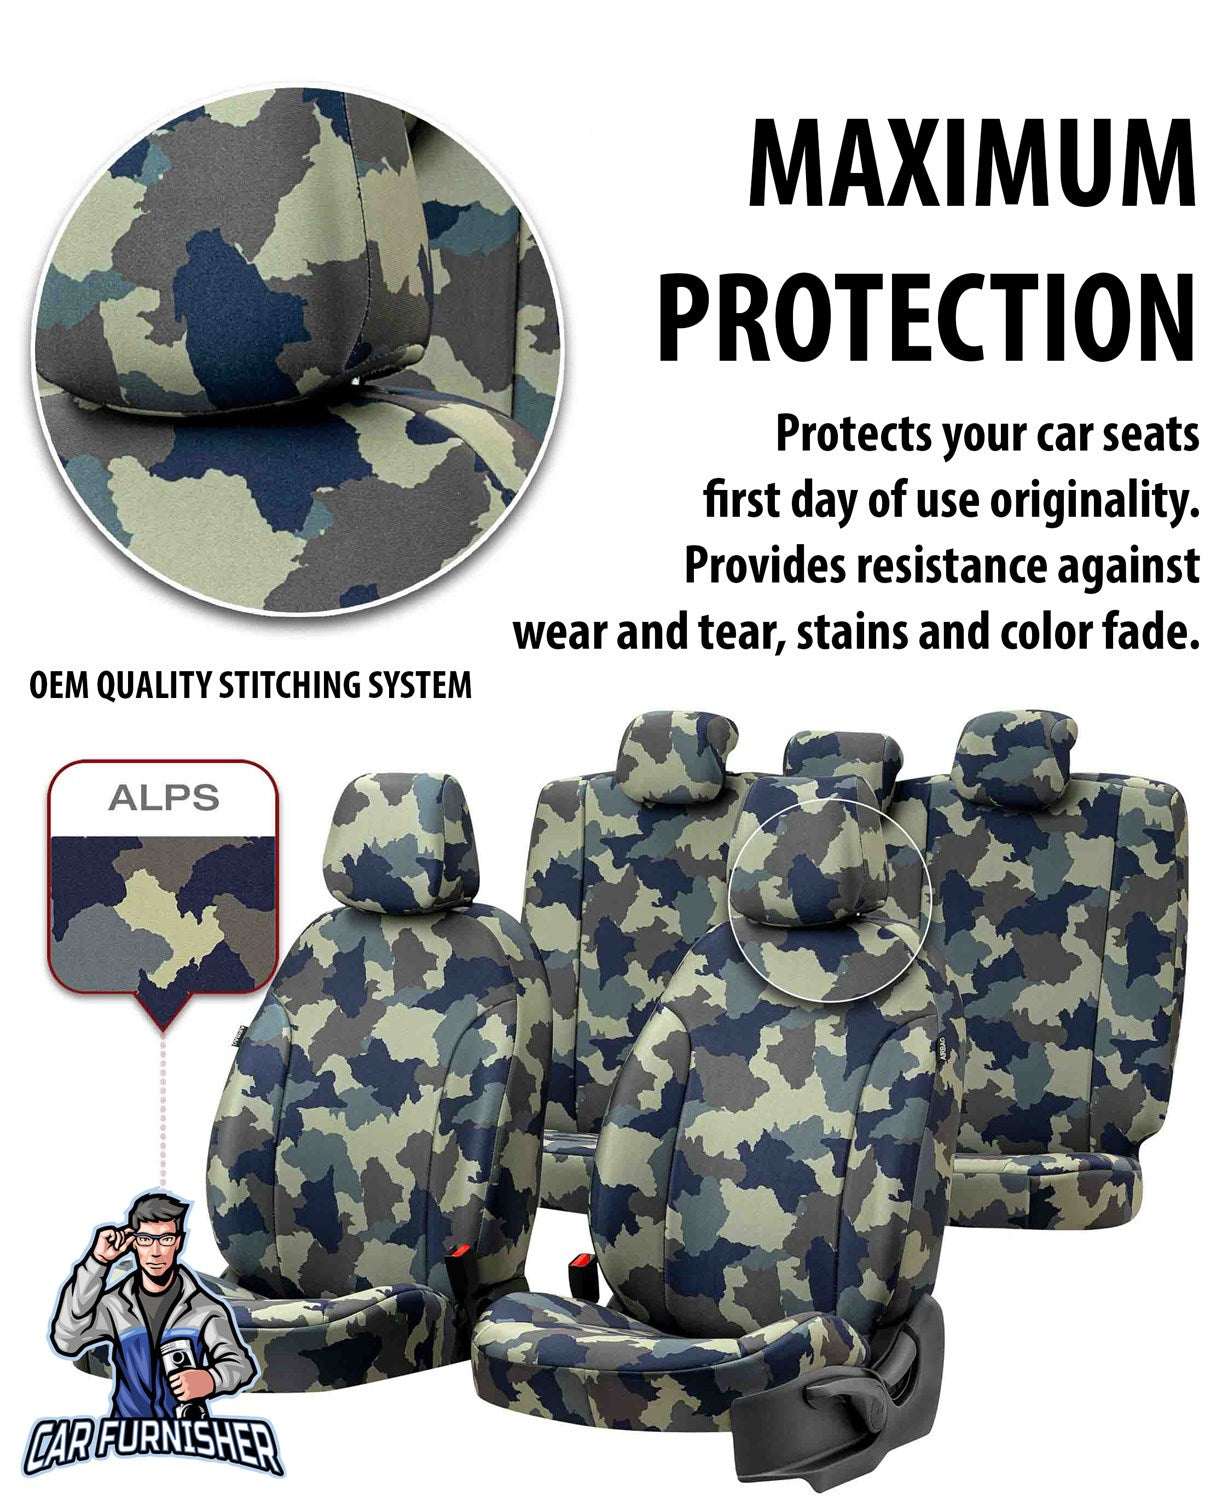 Toyota Hilux Seat Cover Camouflage Waterproof Design Arctic Camo Waterproof Fabric